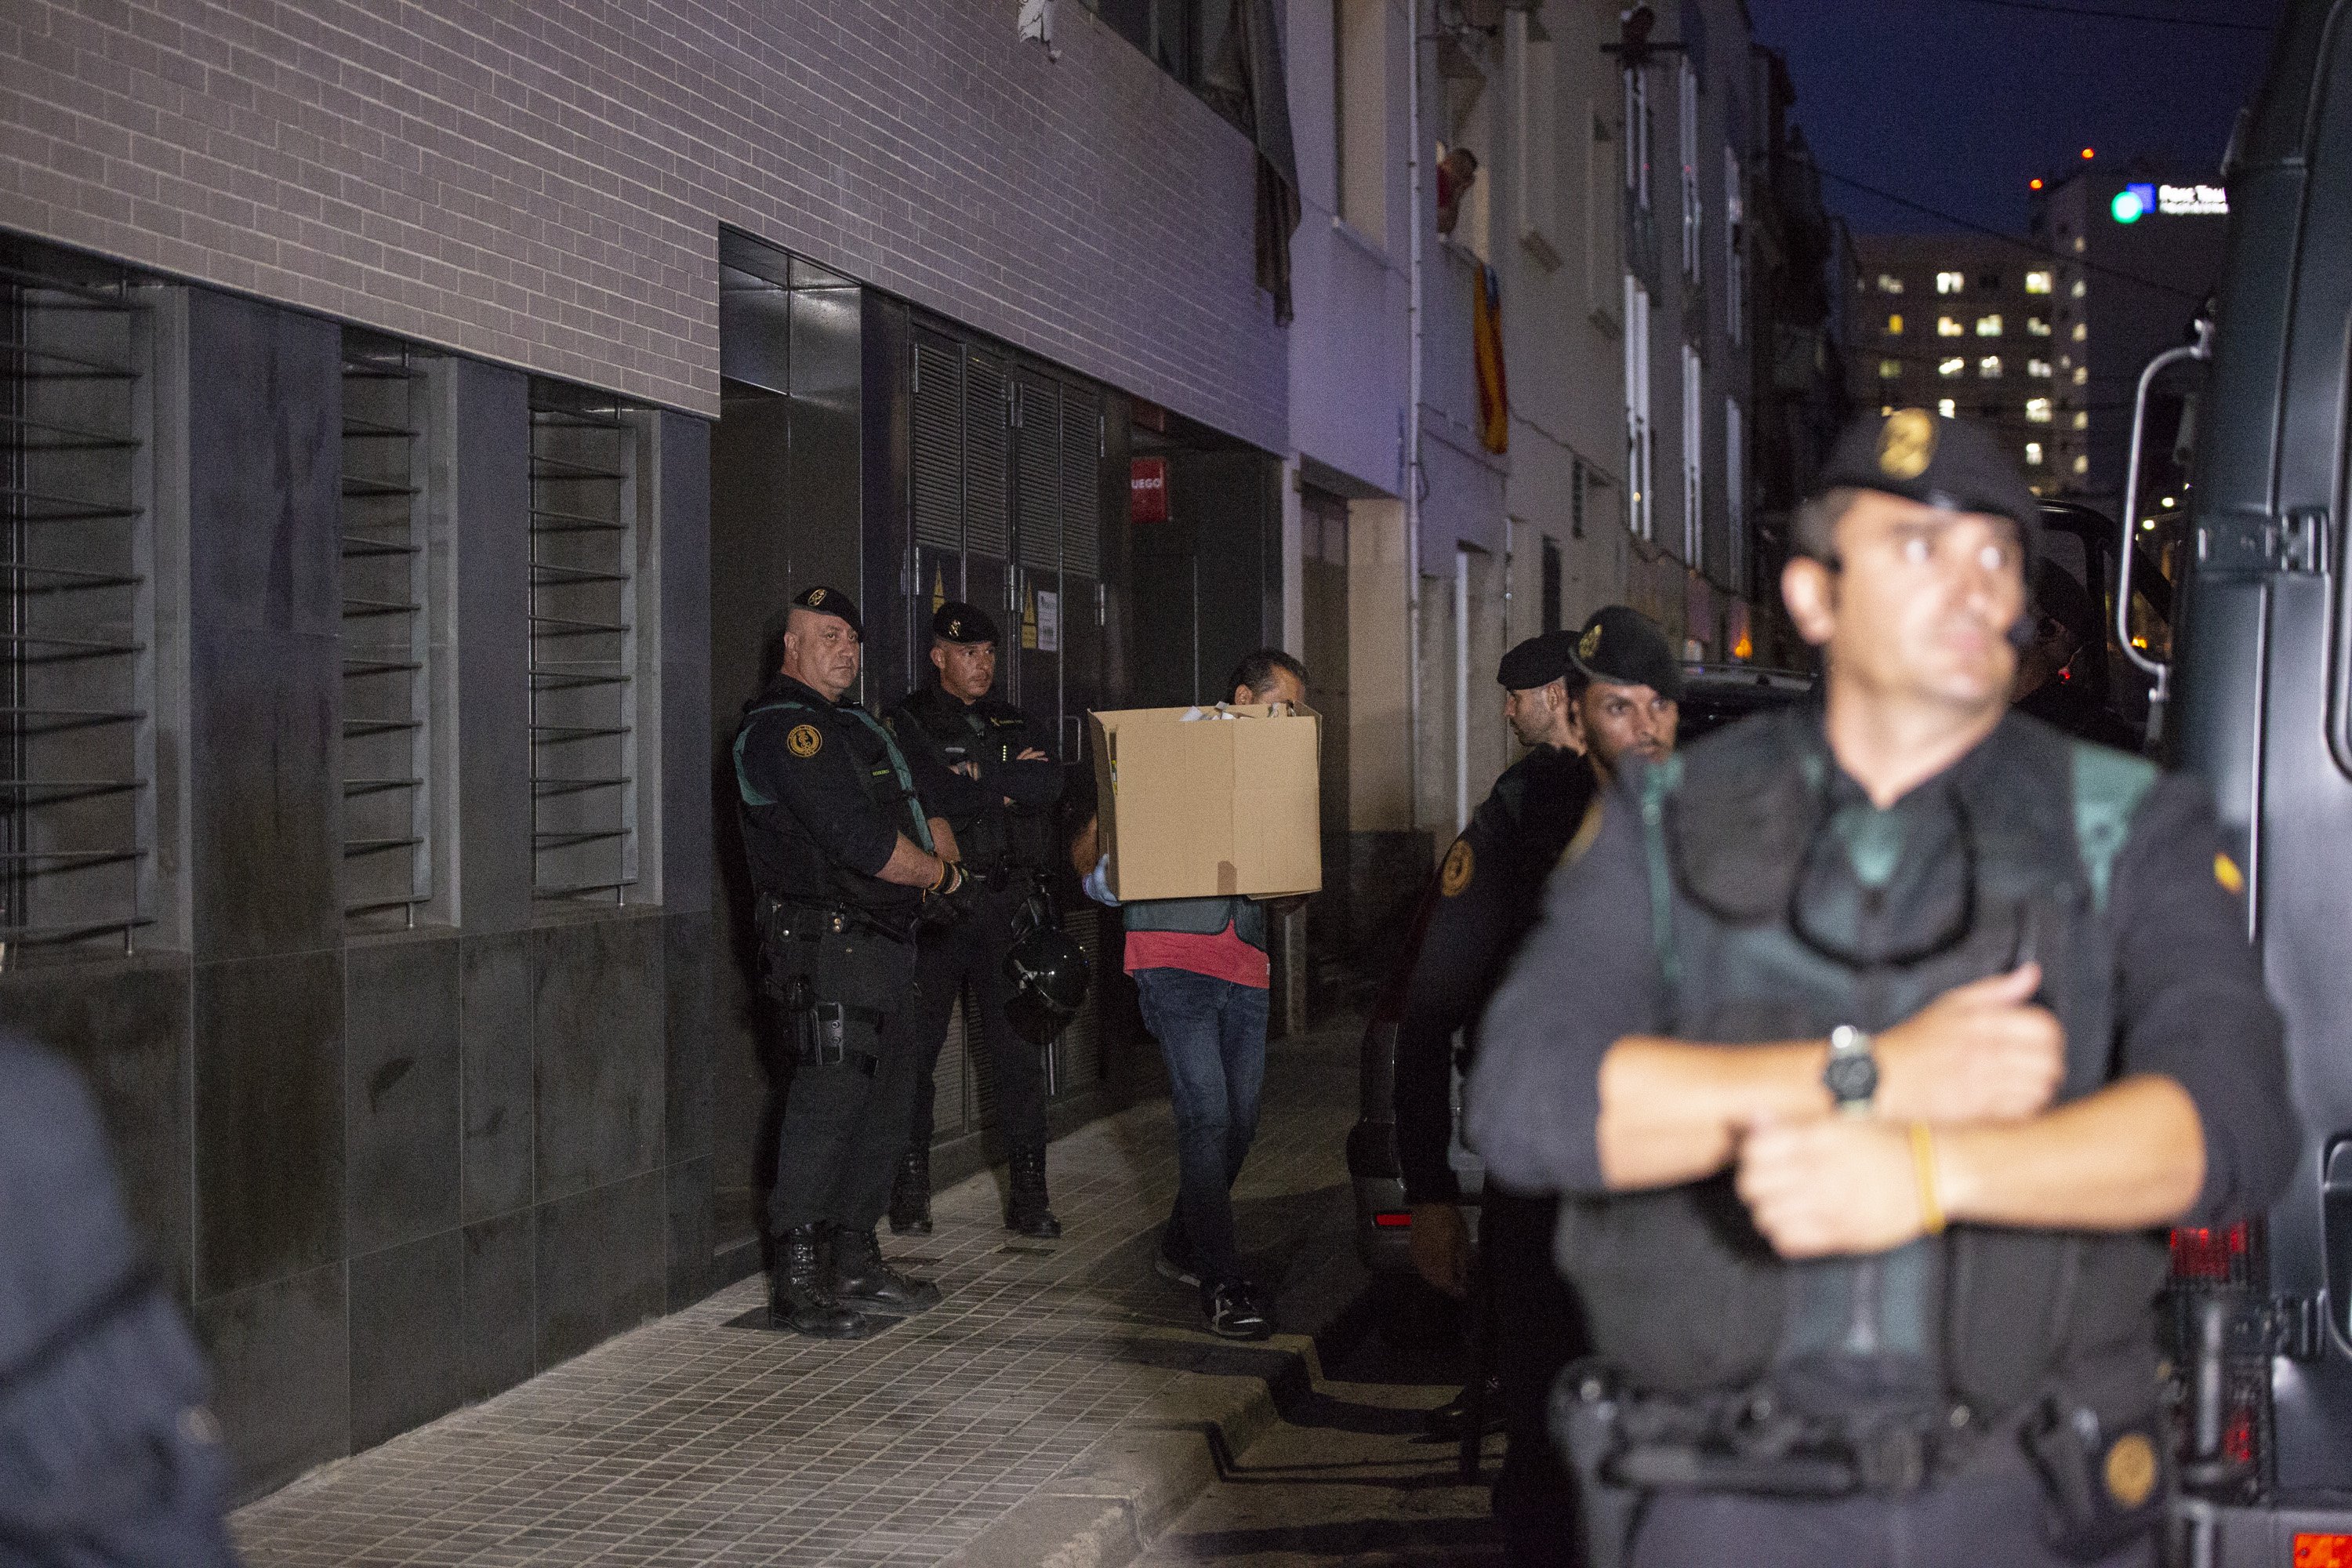 Reports claim Catalan activists have admitted to purchasing explosives